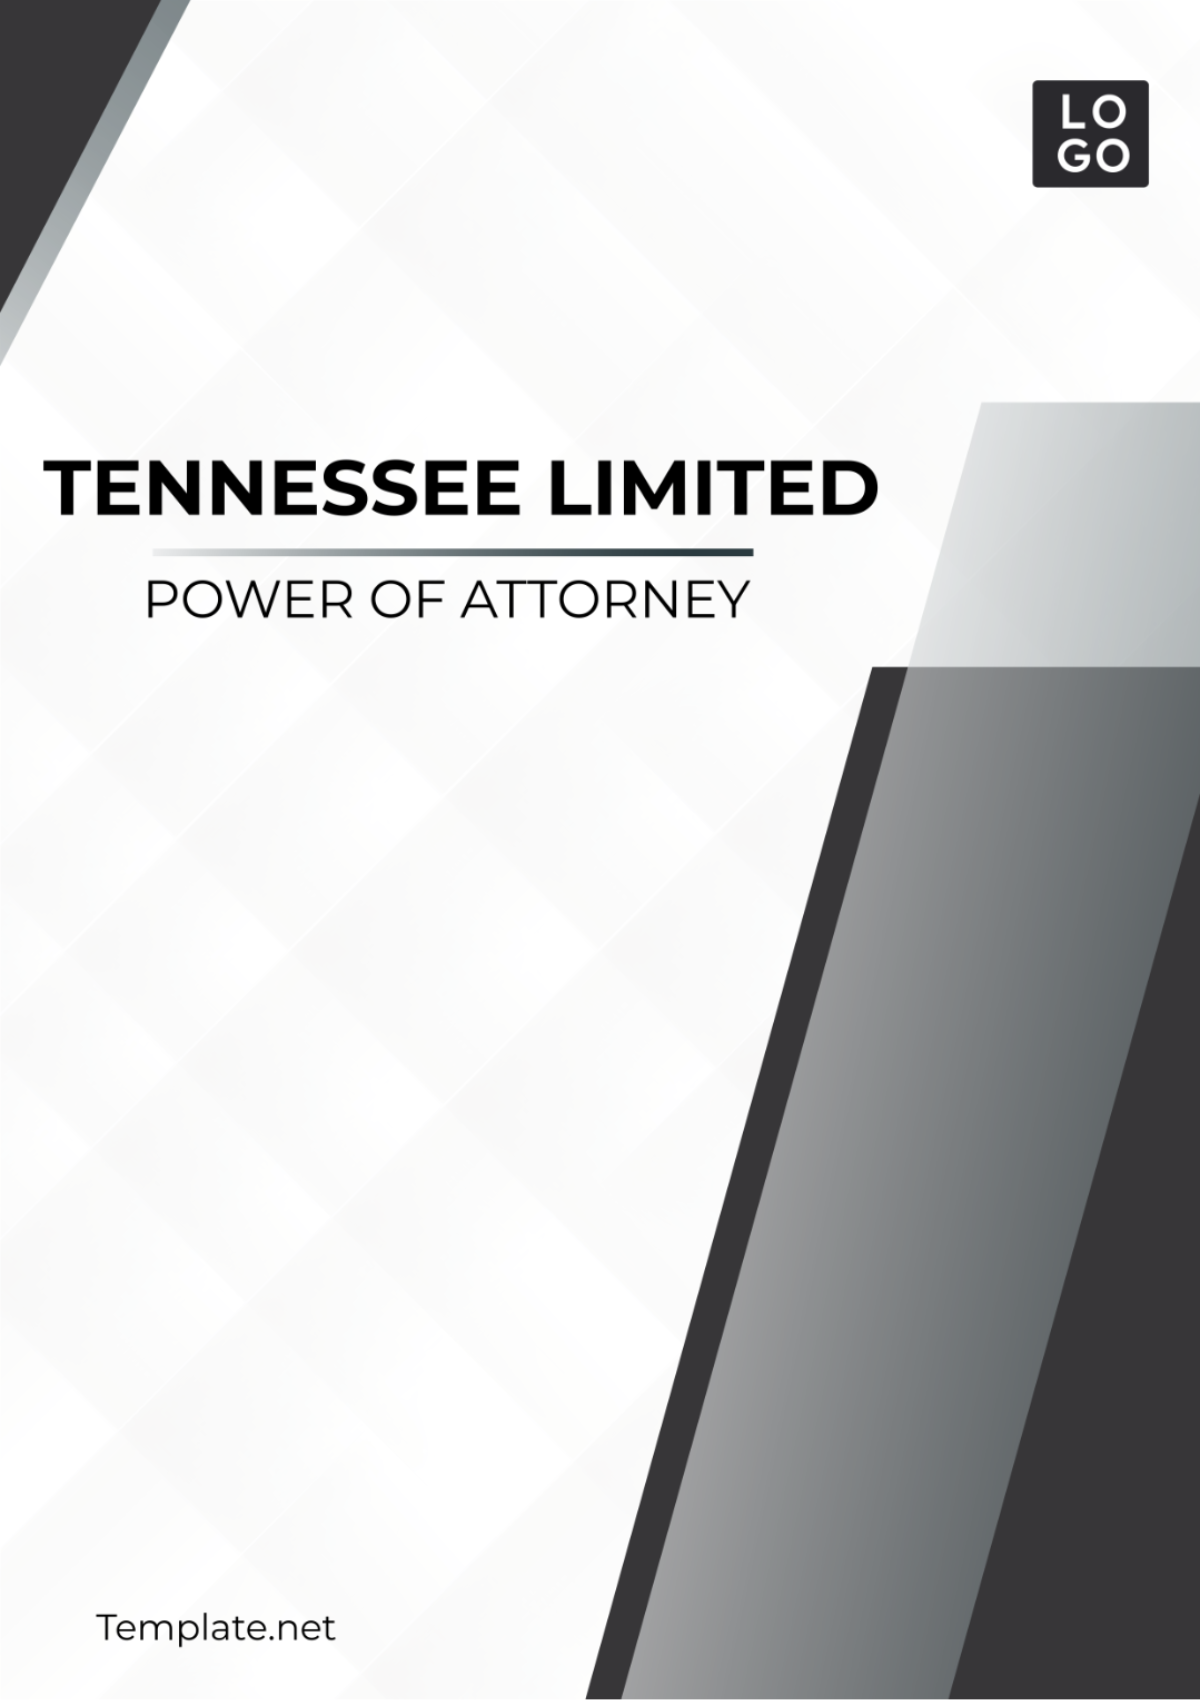 Tennessee Limited Power of Attorney Template